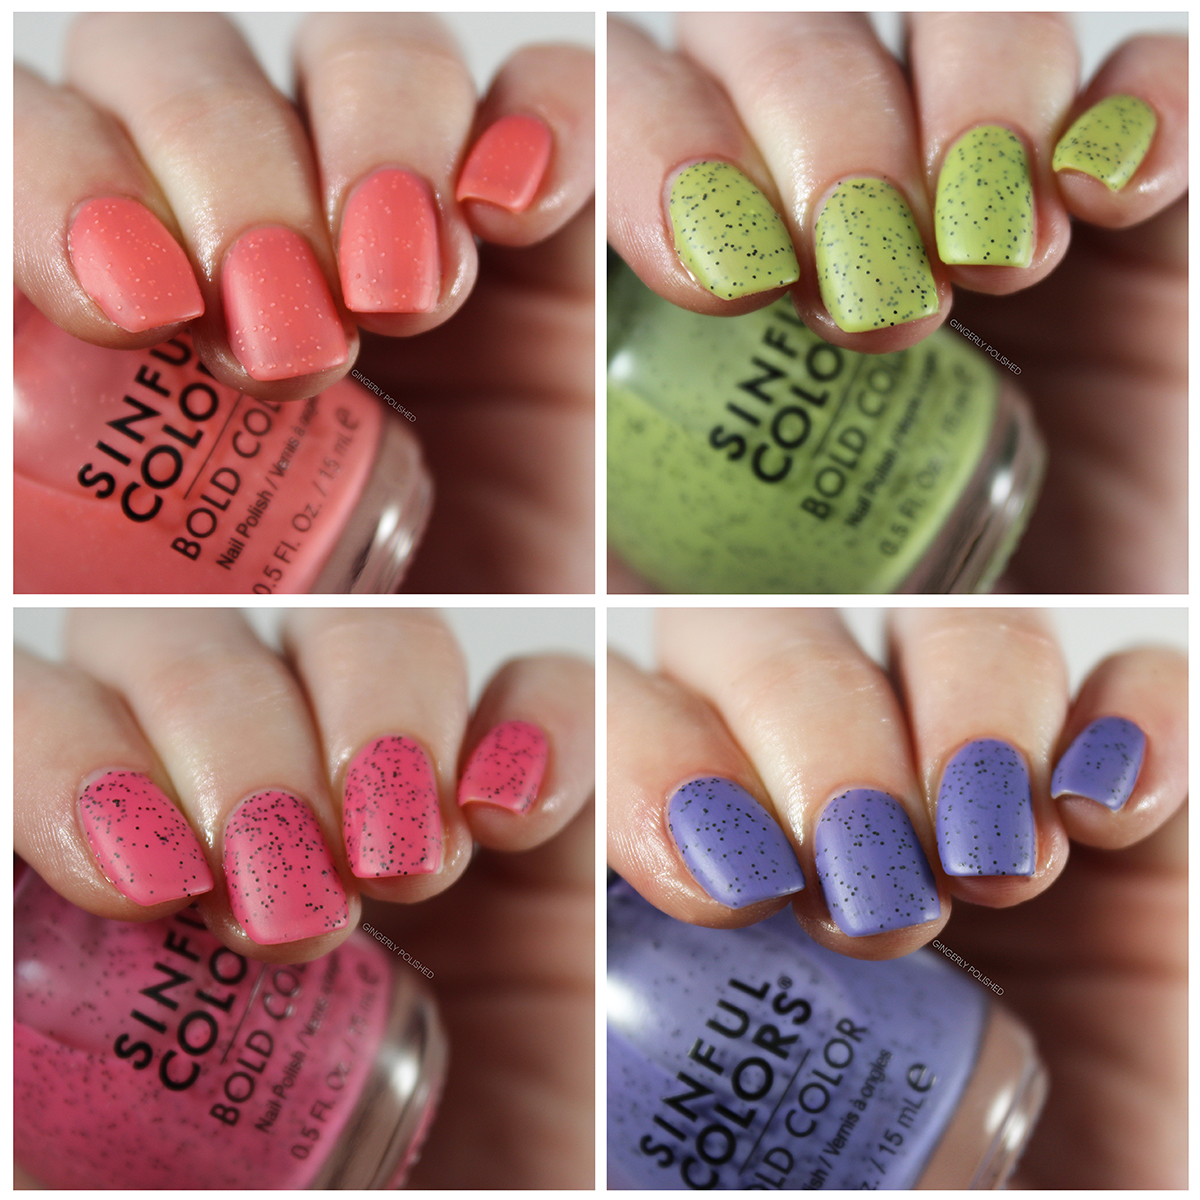 Prairie Beauty: SWATCH & REVIEW: Sinful Colors Essenchills Collection